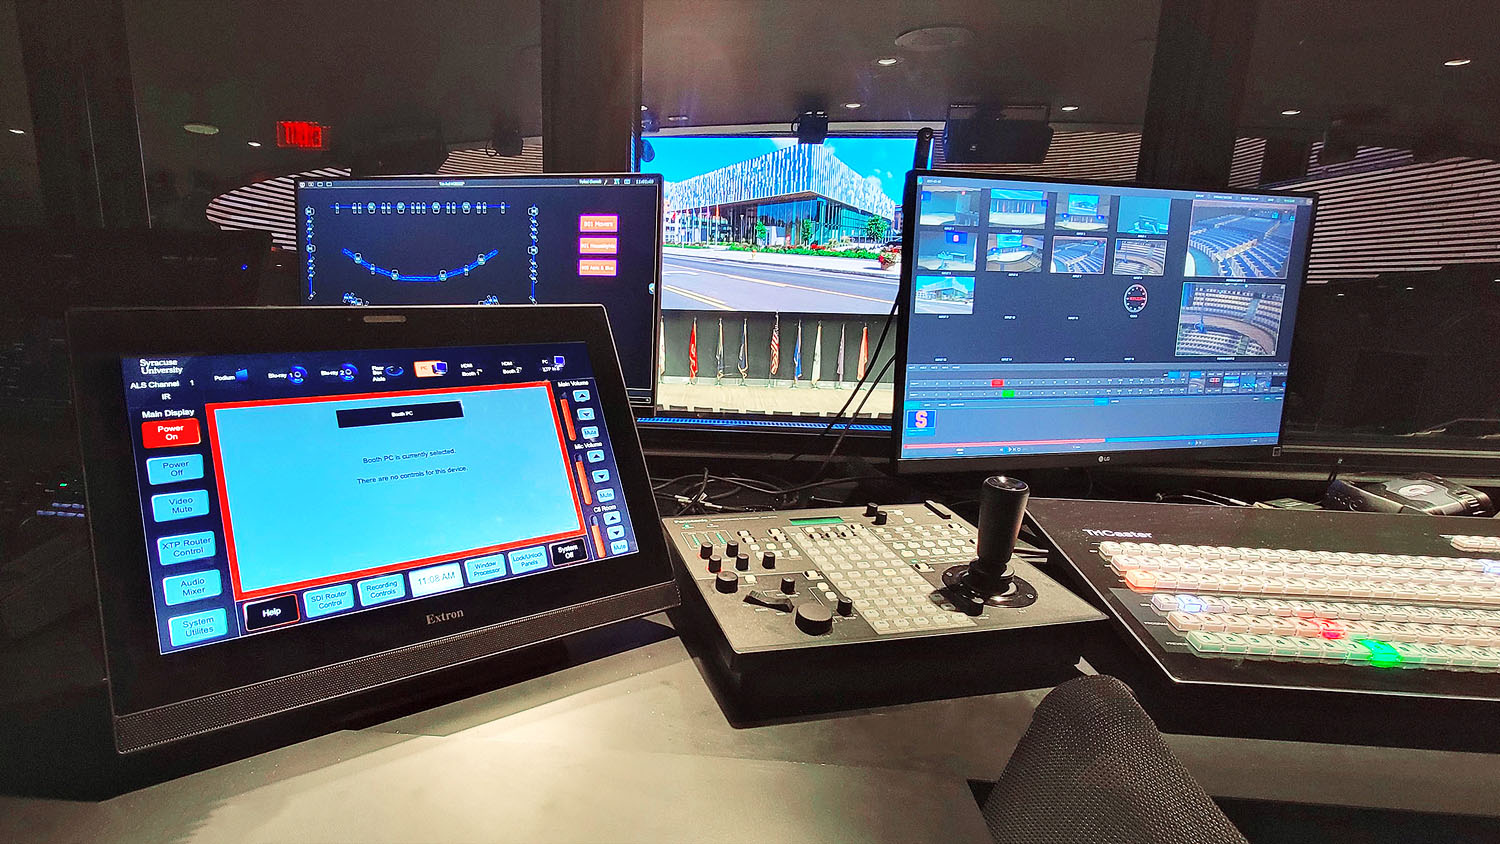 Thumbnail - The support staff uses an Extron TLP Pro 1725TG 17" Tabletop TouchLink Pro Touchpanel to operate the AV system for the presenter.